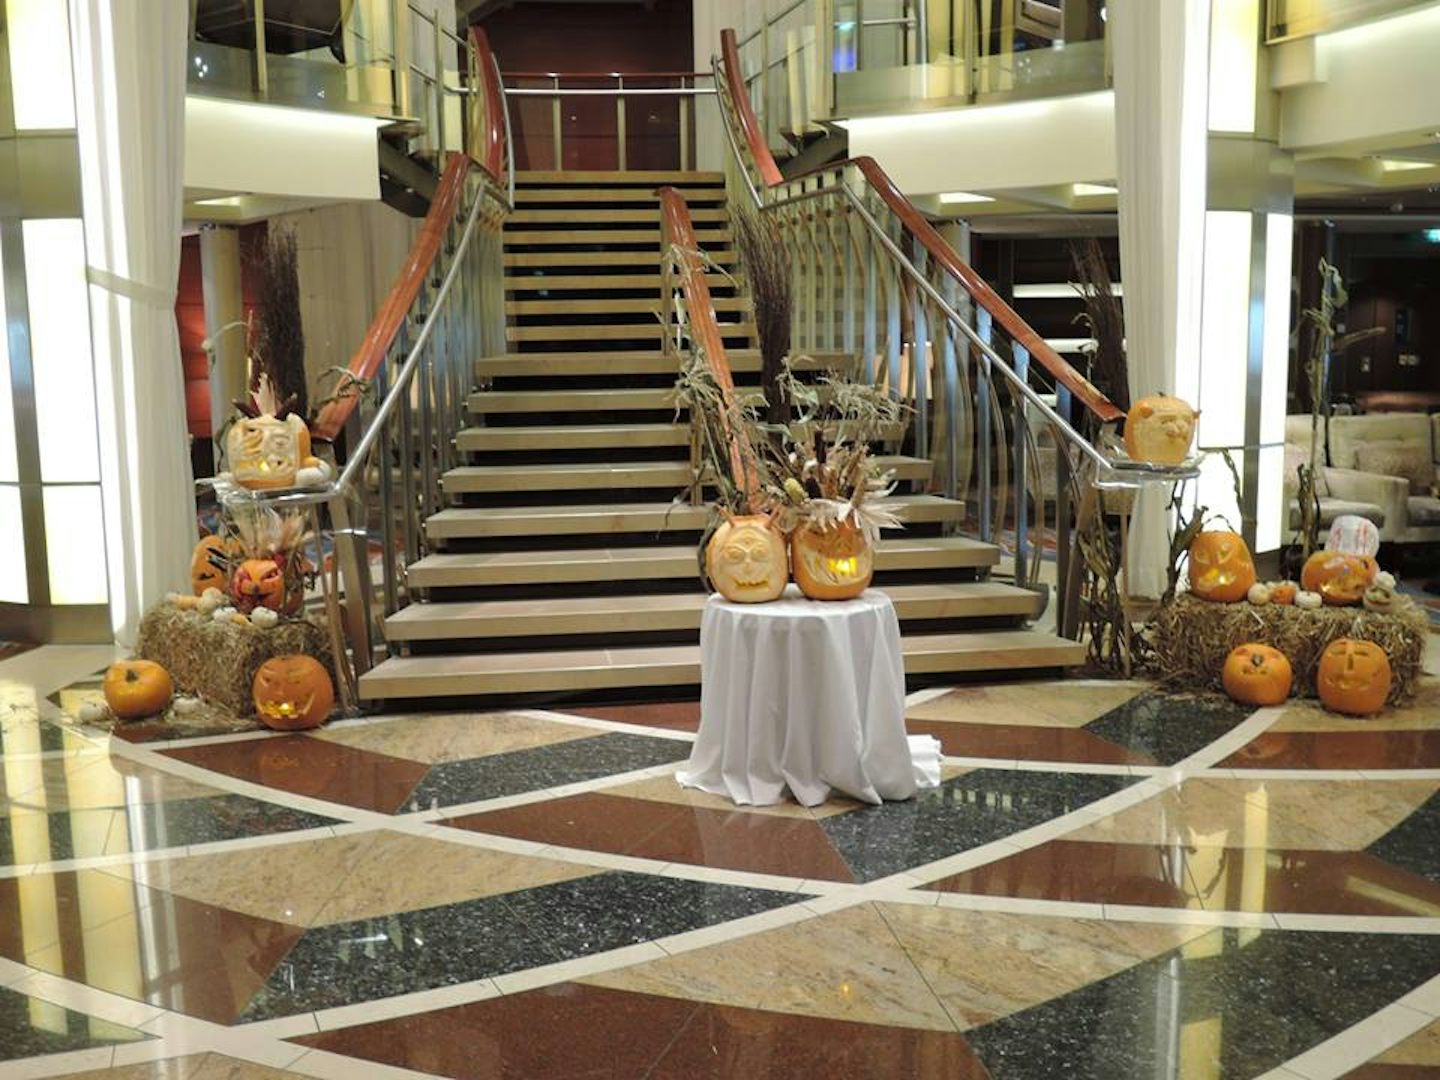 Foyer of Celebrity Equinox decorated for Halloween